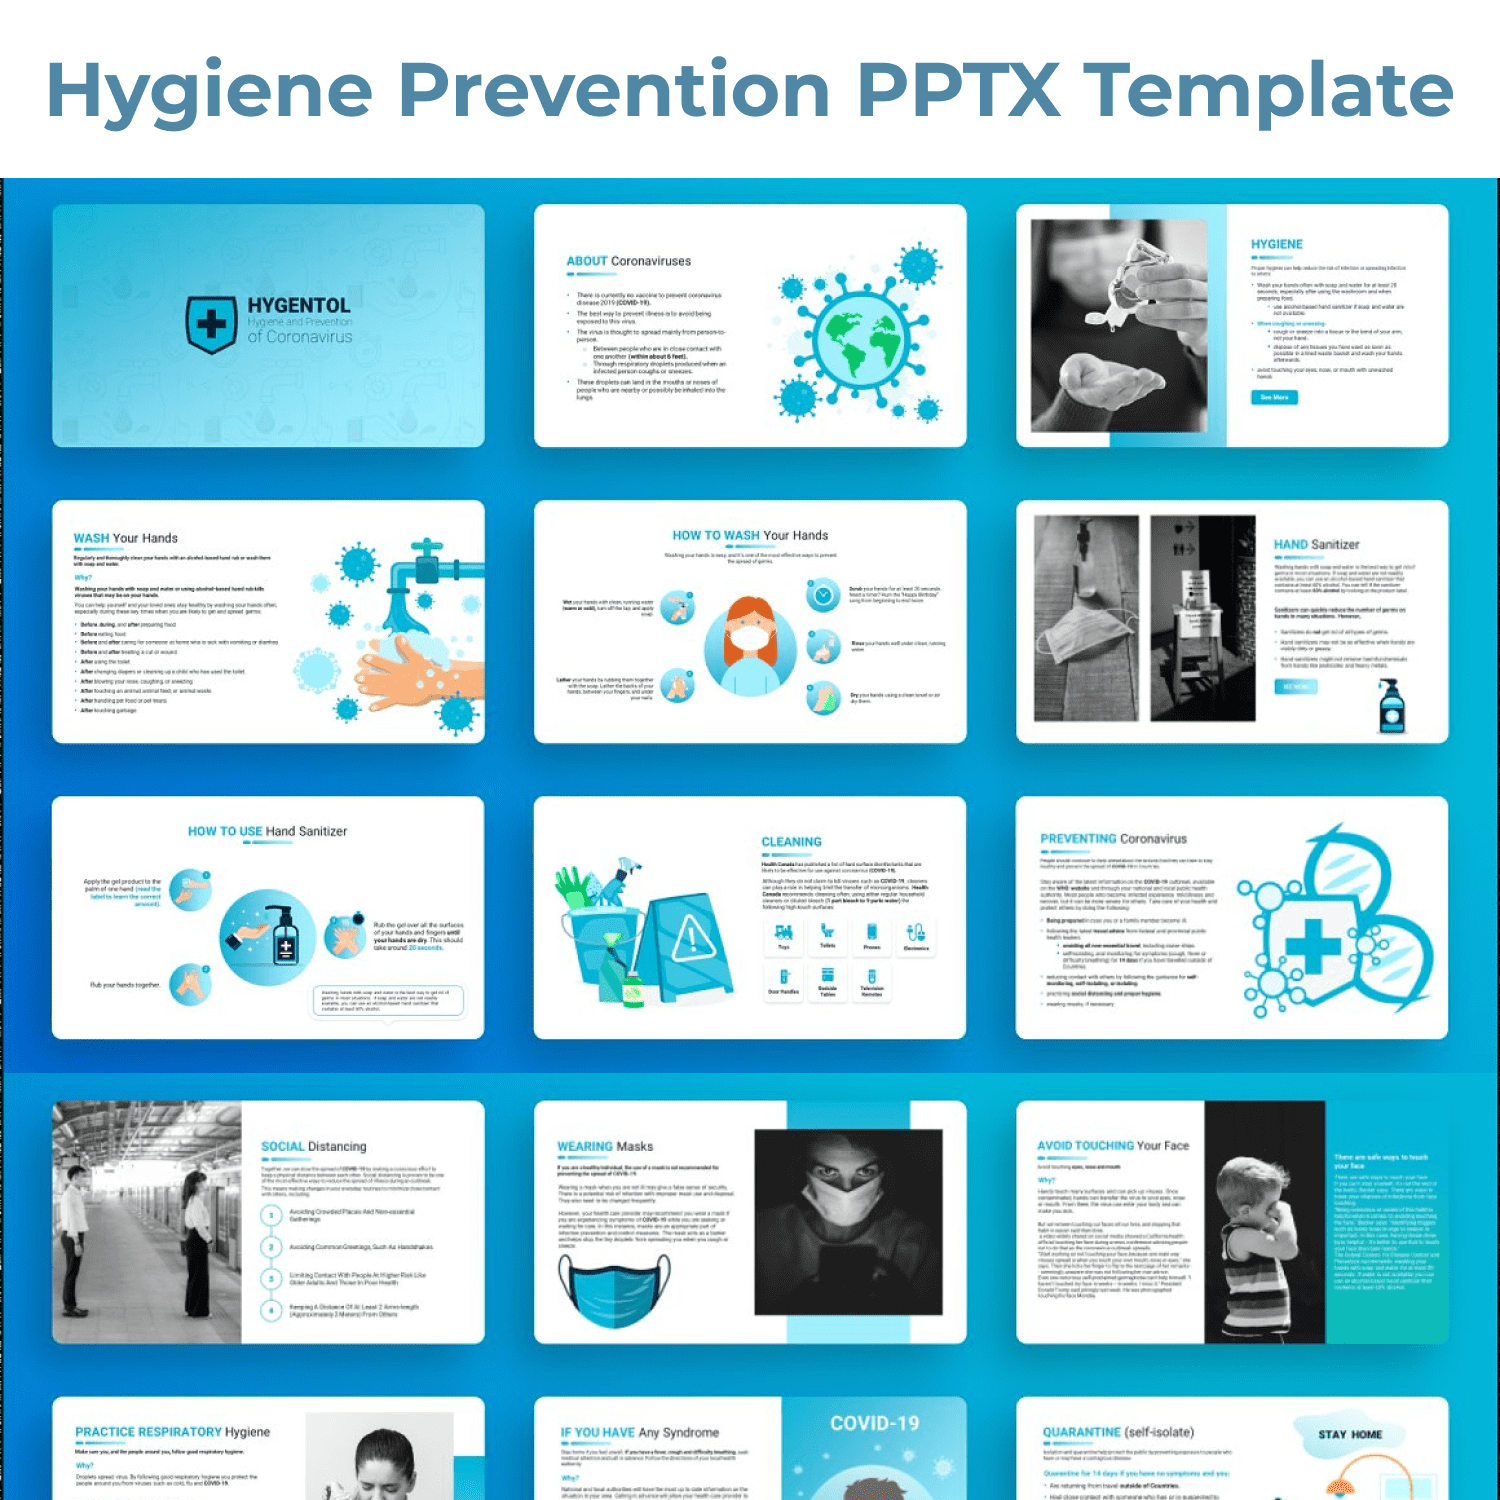 Hygiene Prevention PPTX Template cover image.